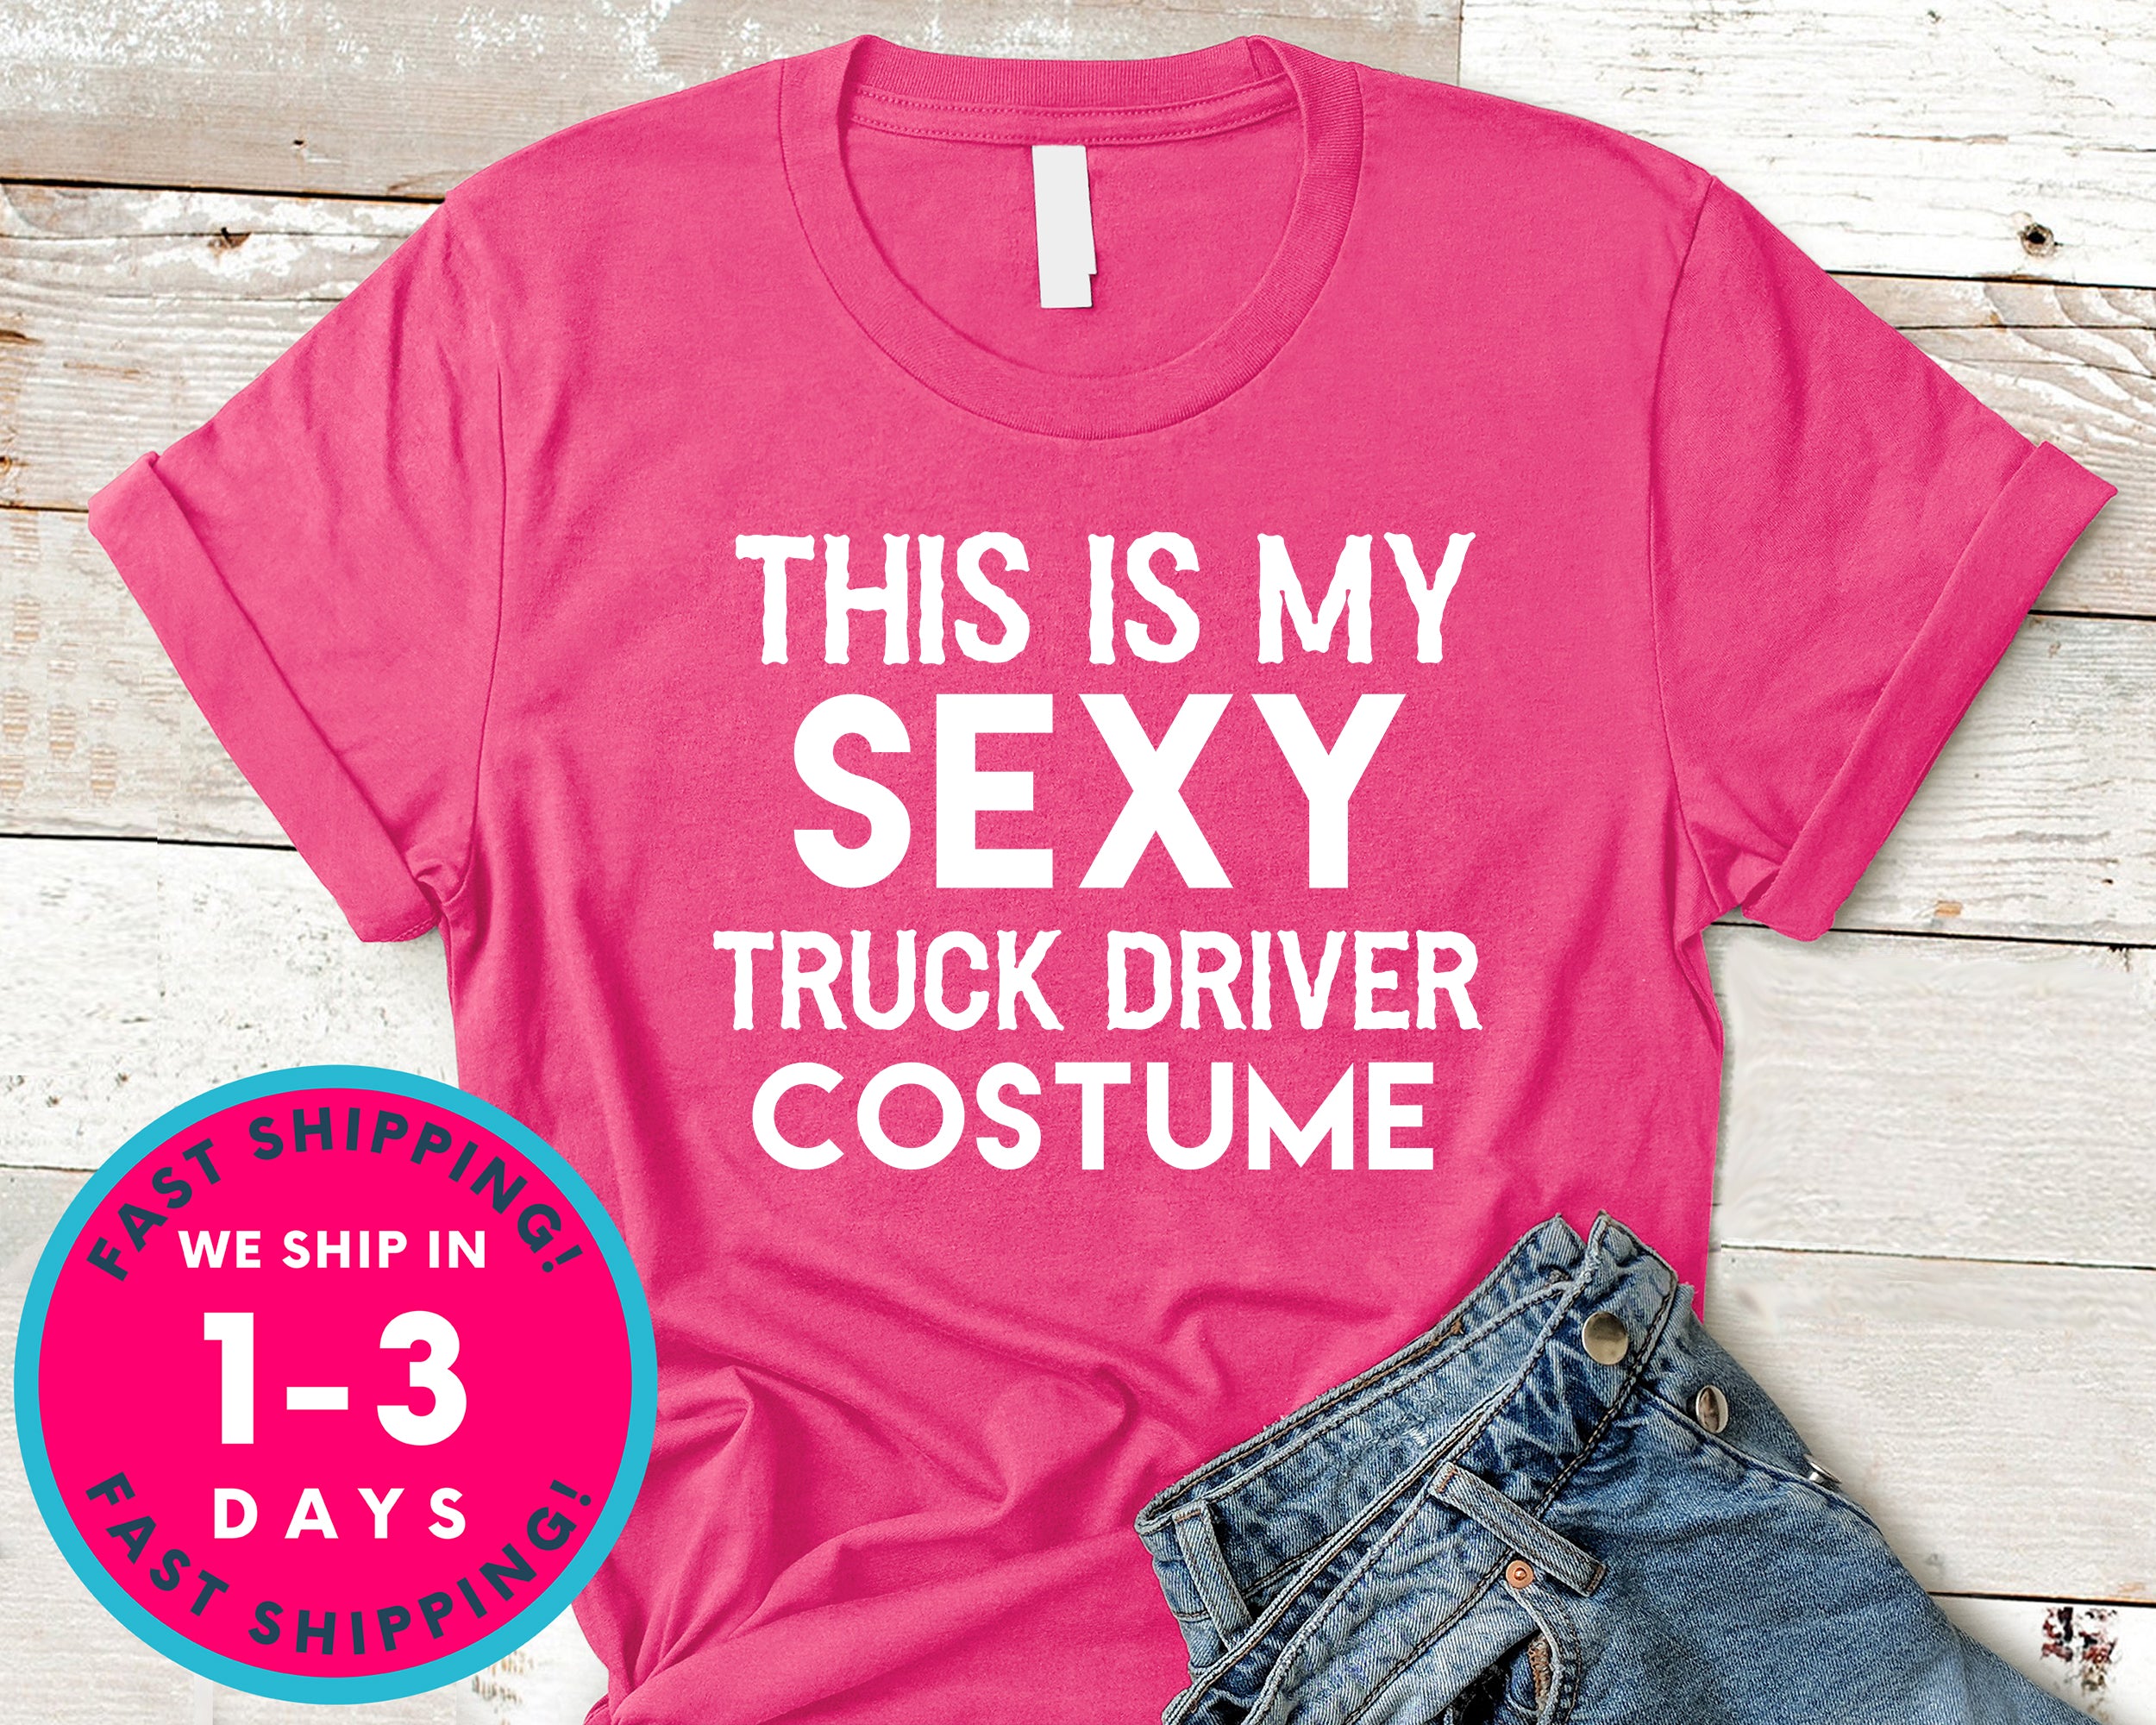 Funny This Is My Sexy Truck Driver Costume T-Shirt - Halloween Horror Scary Shirt